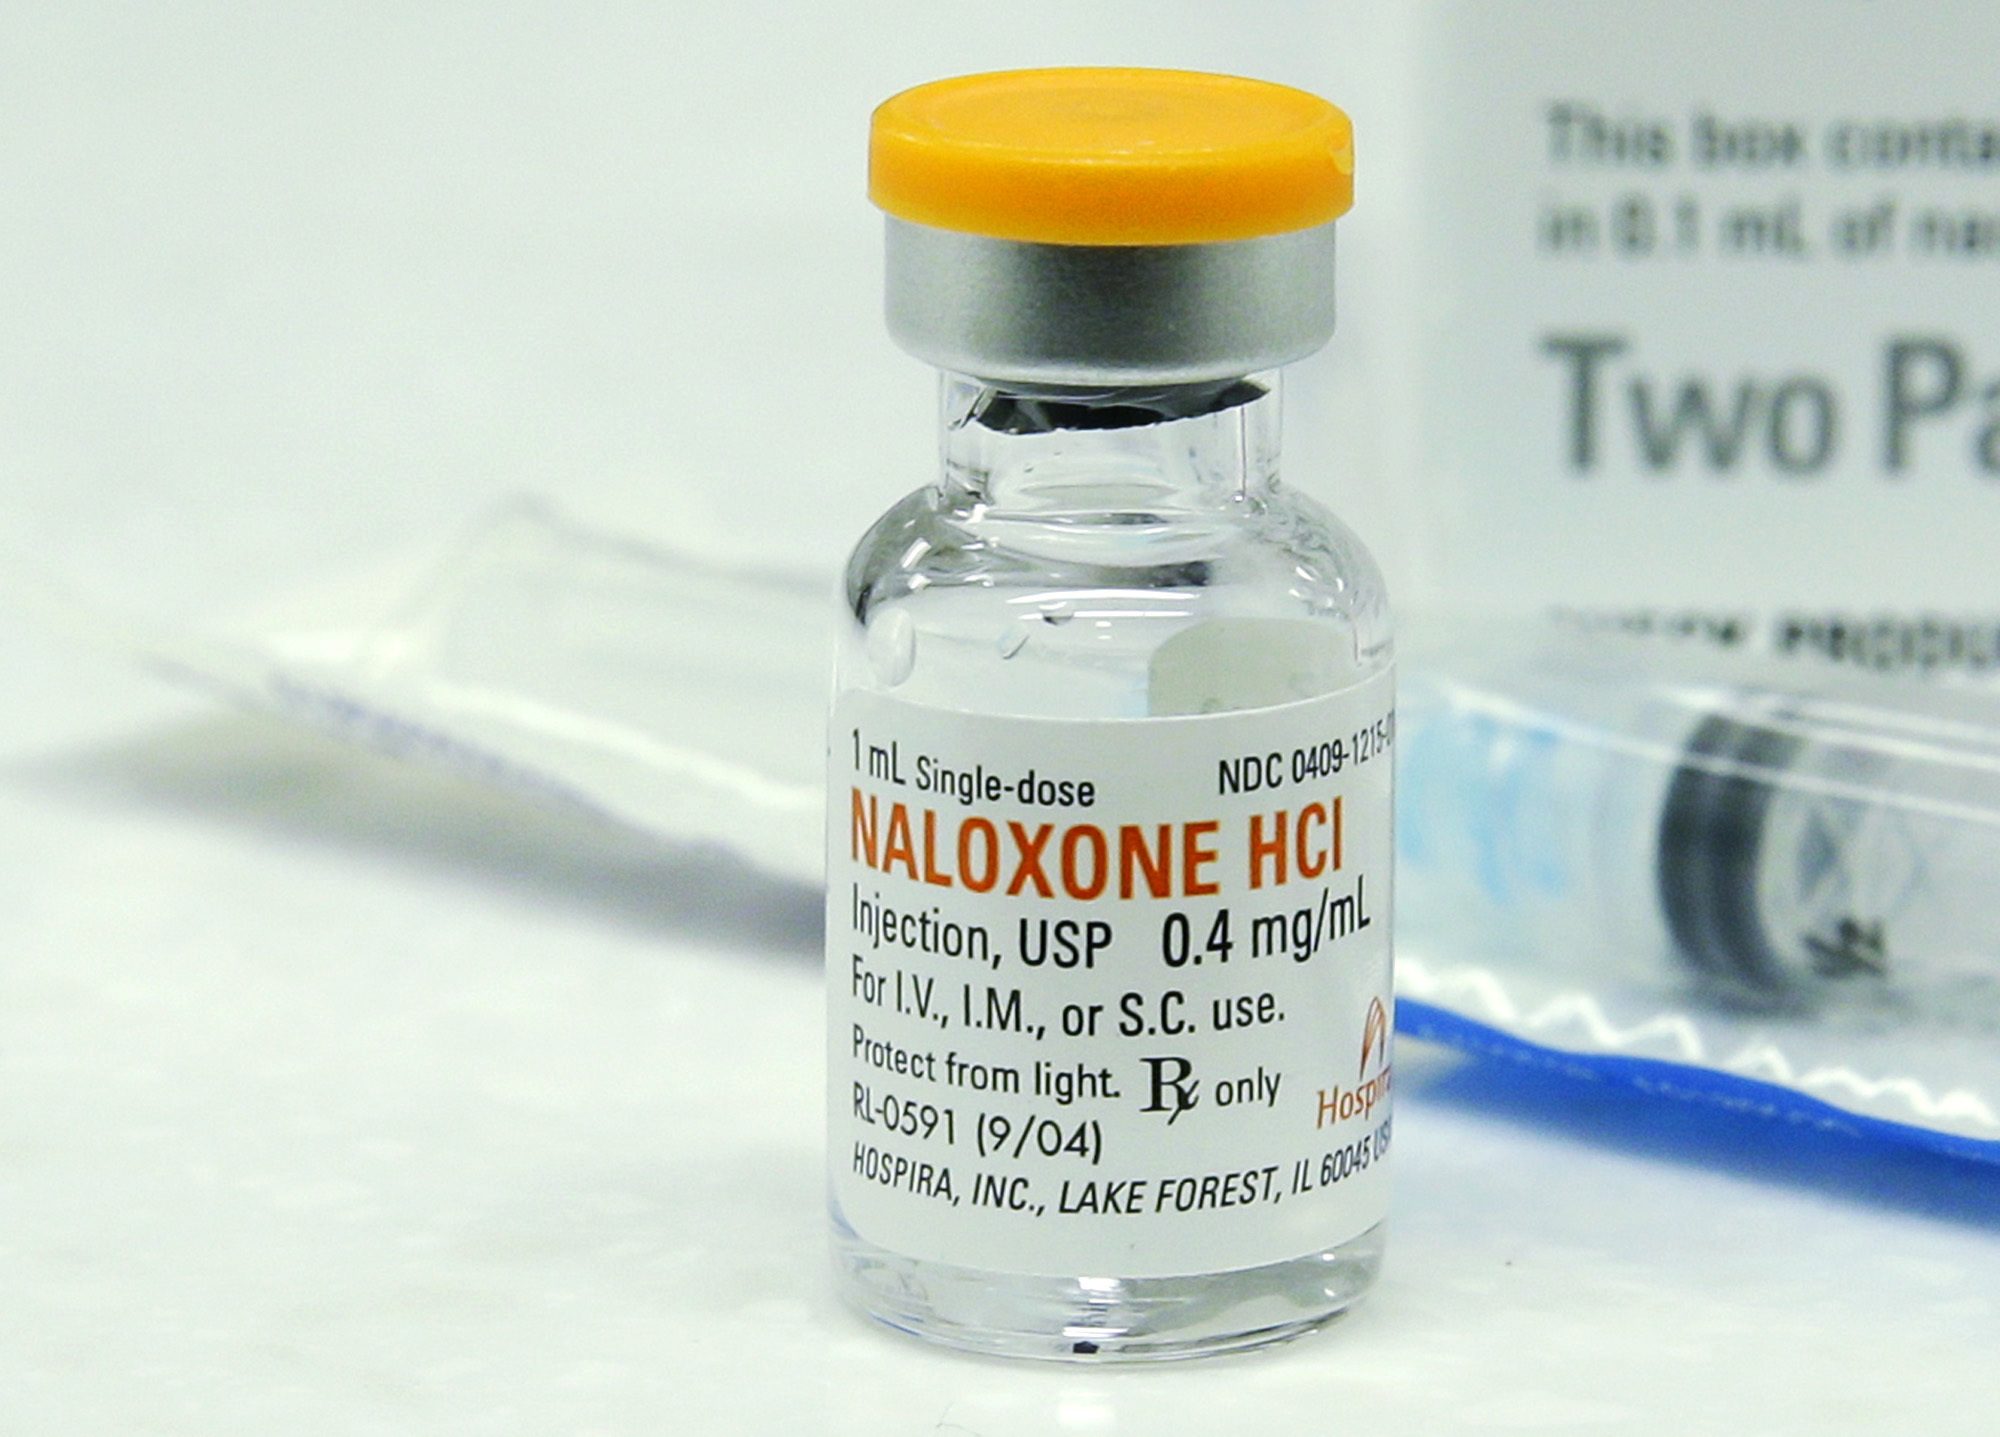 A vial of Naloxone, which can be used to block the potentially fatal effects of an opioid overdose, is shown Friday at an outpatient pharmacy at the University of Washington. (Ted S. Warren/The Associated Press)